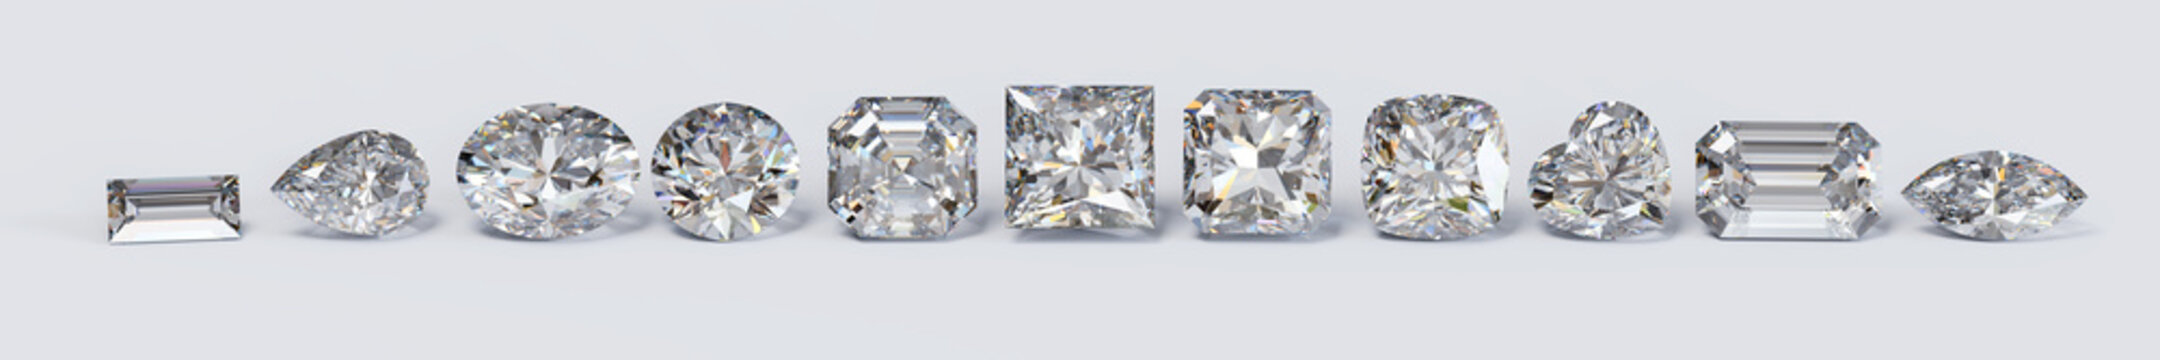 The most popular diamond cut styles in line on white background. Wide image